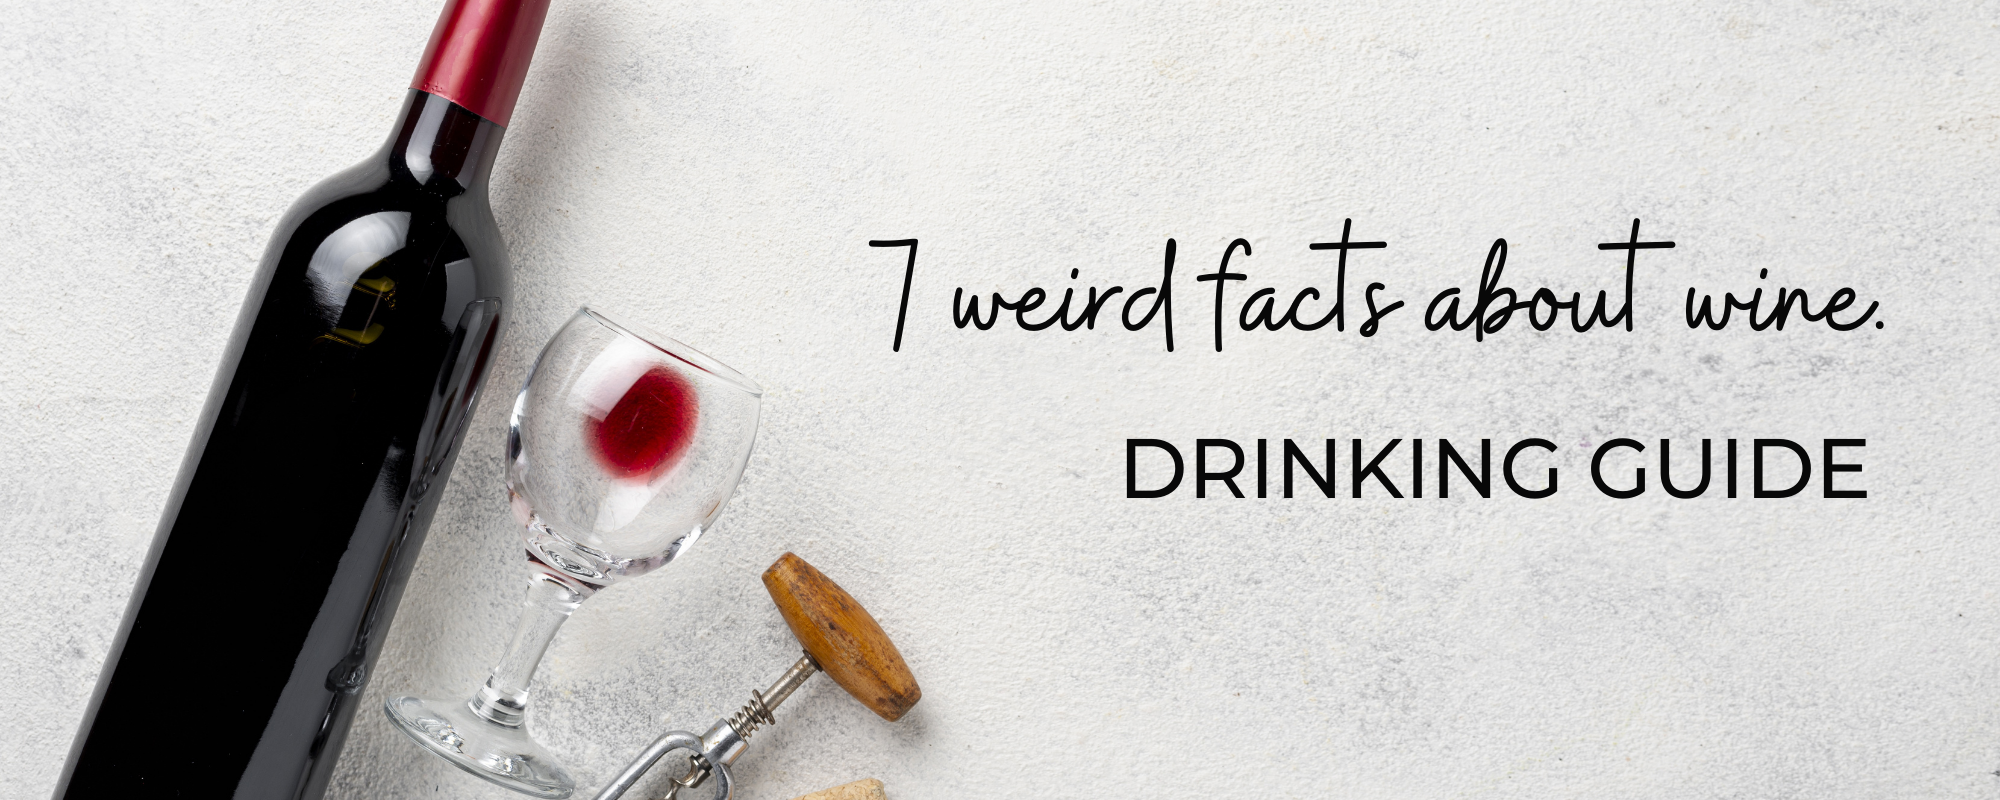 7  Weird Facts You Need to Know About Wine.